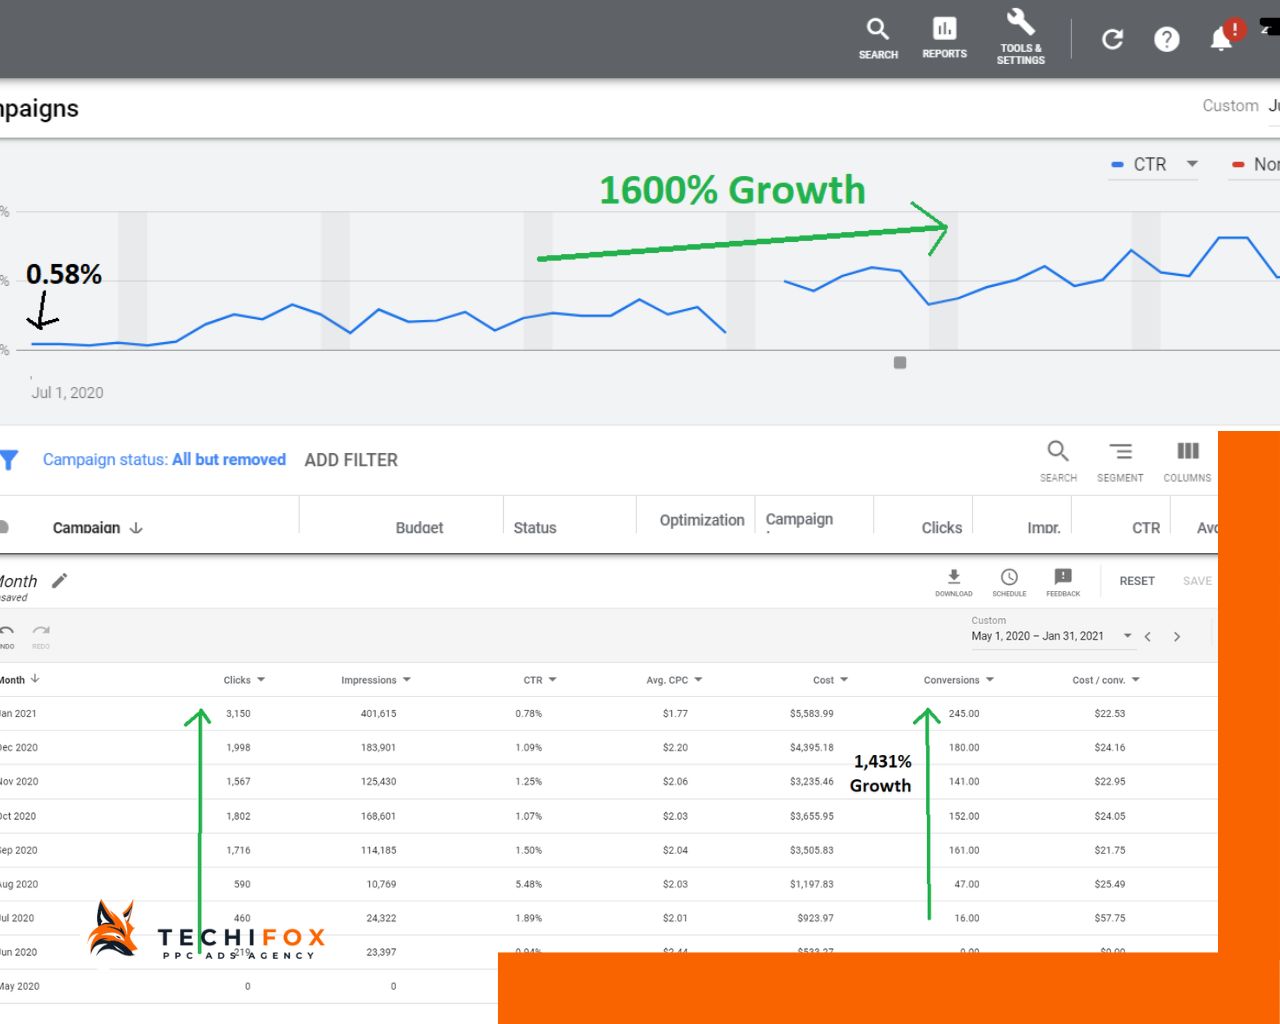 14x Business Growth for The Client using PPC Marketing